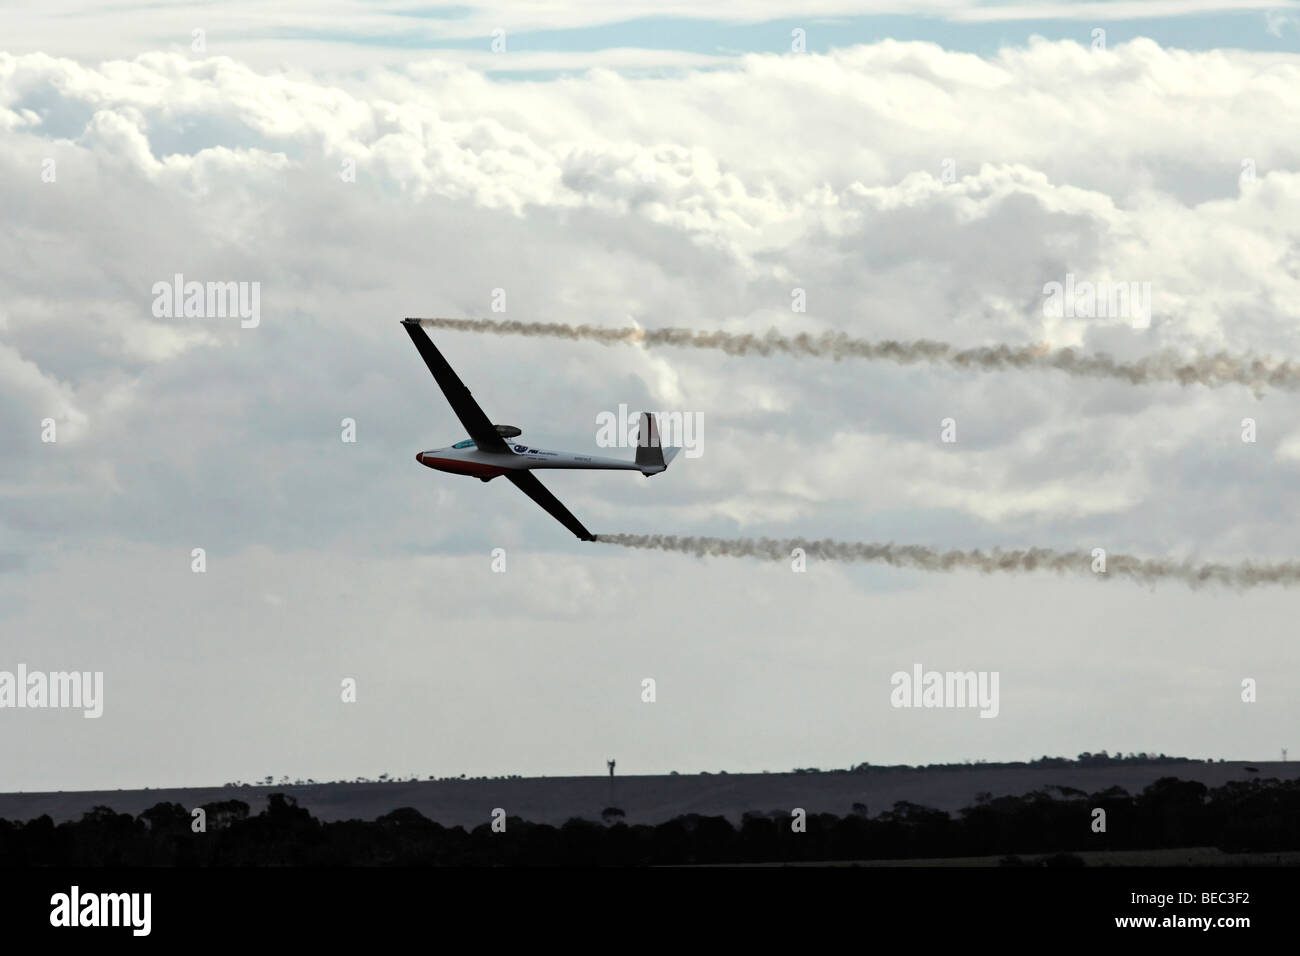 Bob Carlton Demonstrating His 1N Jet Powered Glider Aircraft at the 2009 Avalon Air show Melbourne Australia Stock Photo